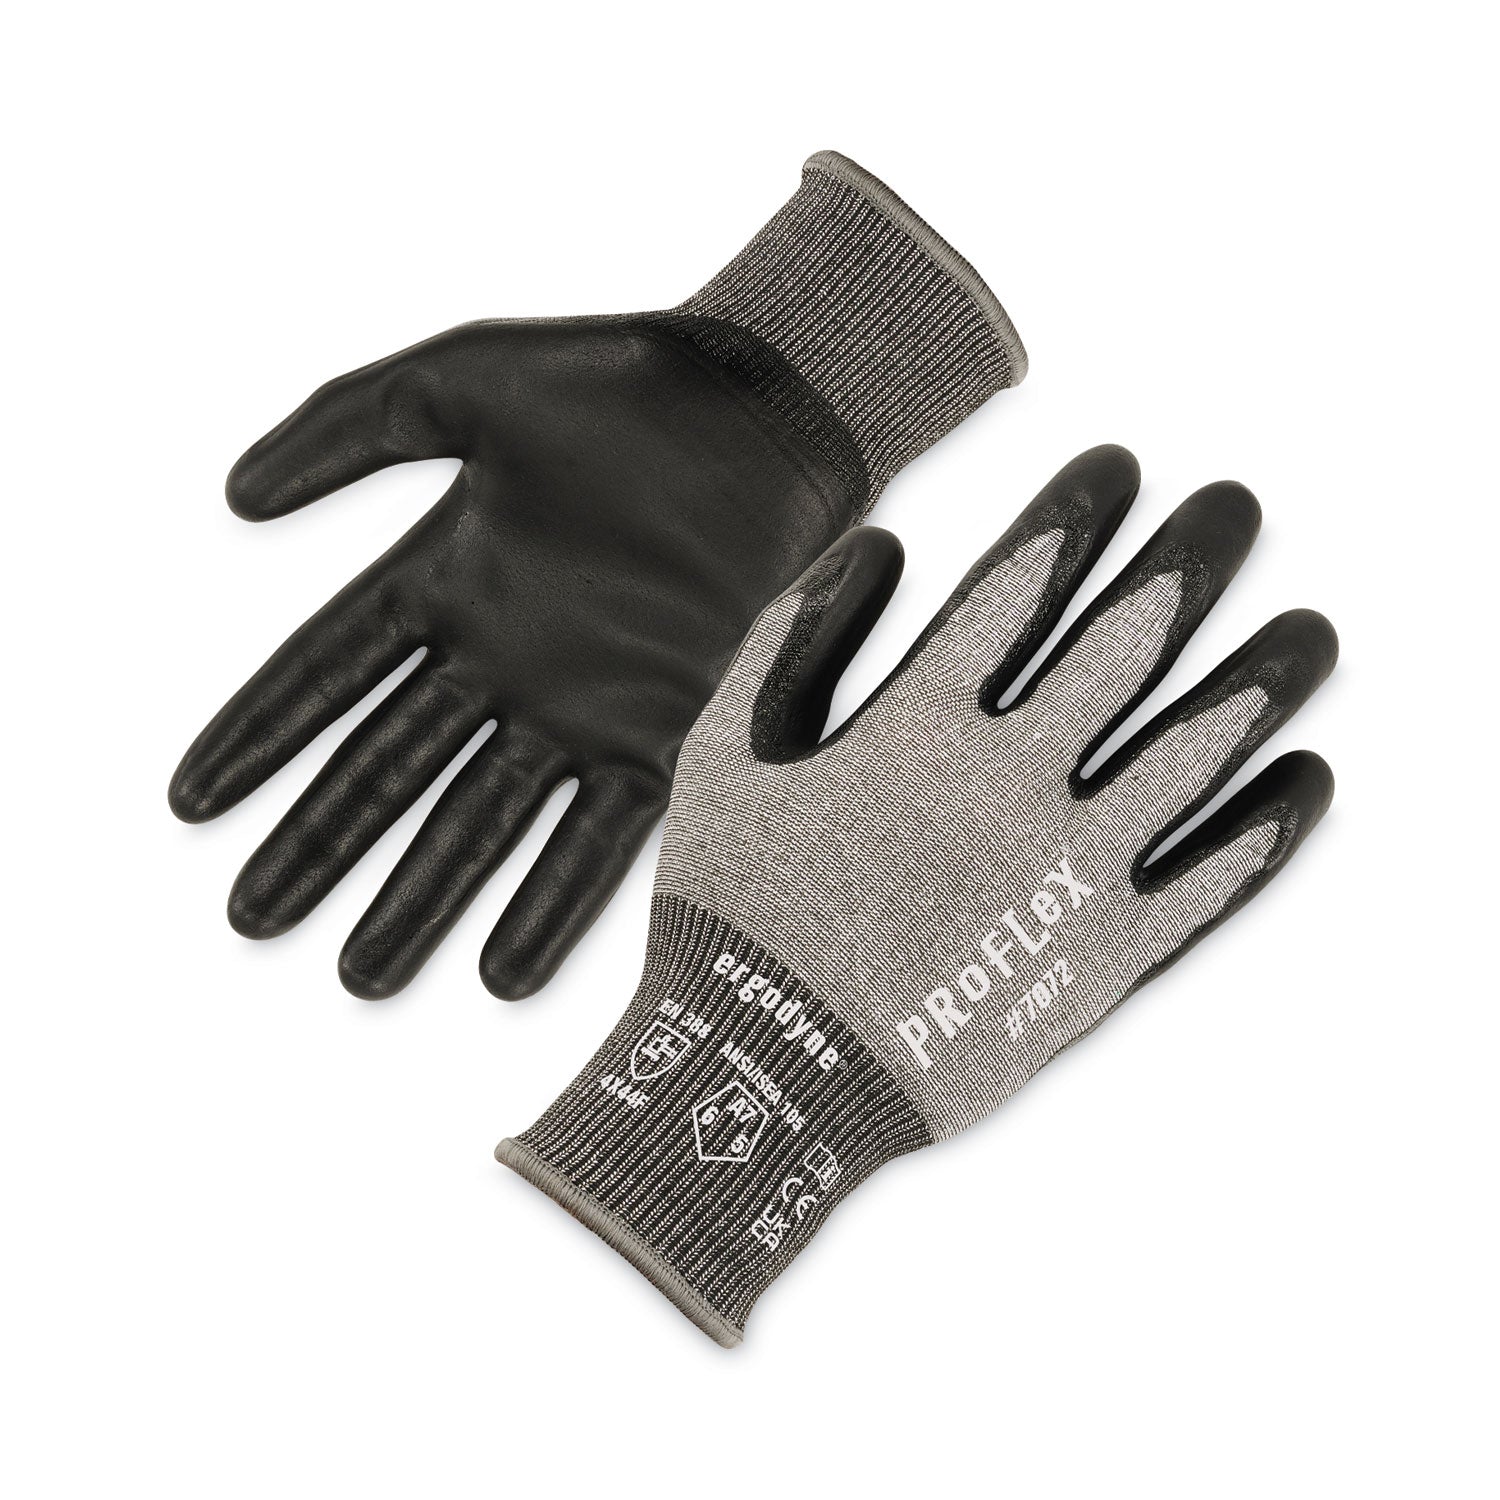 proflex-7072-ansi-a7-nitrile-coated-cr-gloves-gray-large-pair-ships-in-1-3-business-days_ego10314 - 1